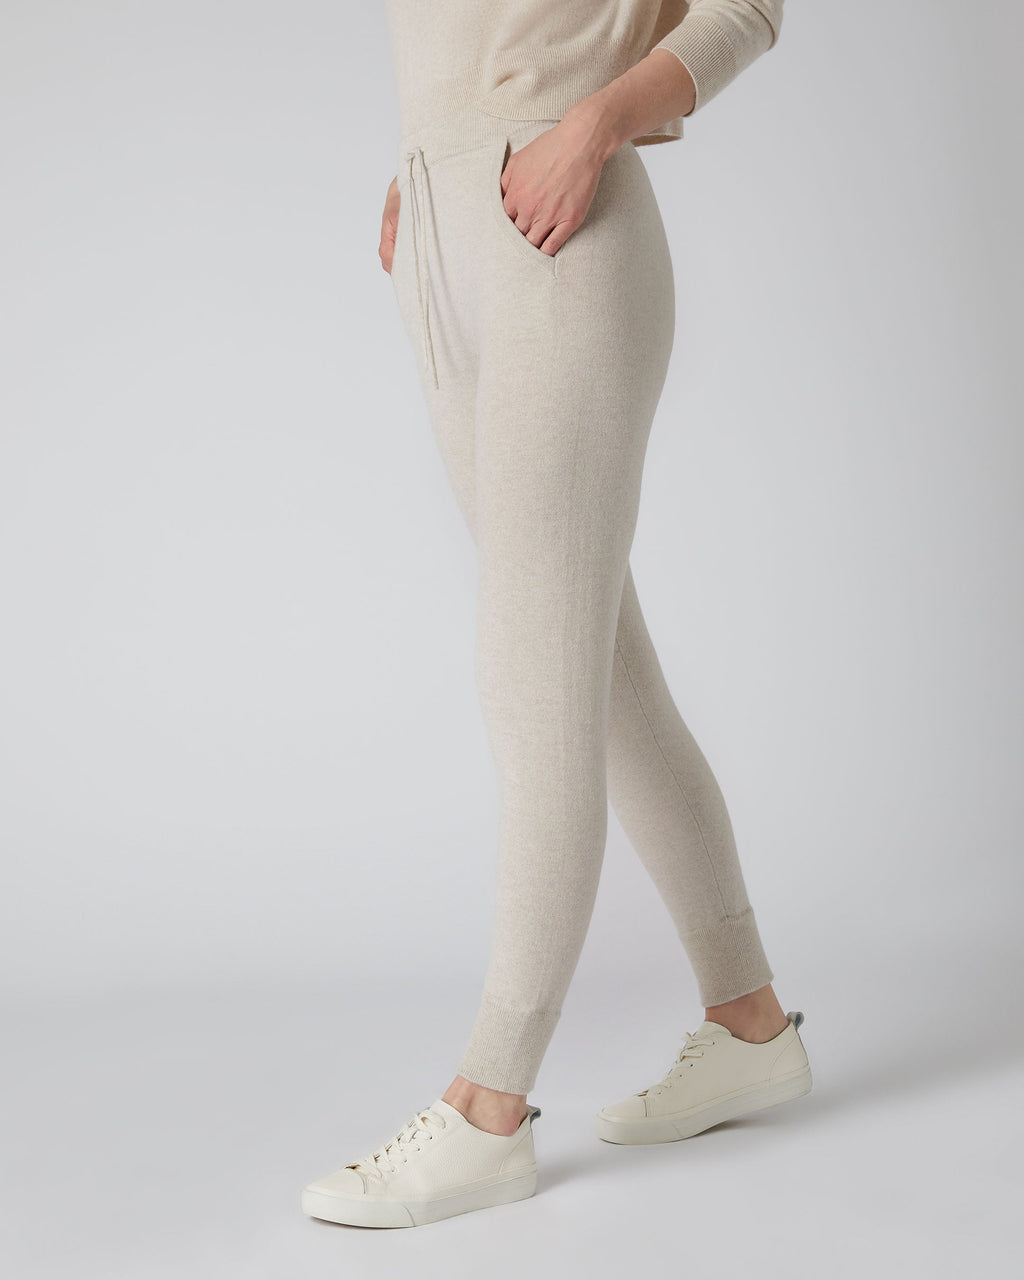 Fall for Savings ! BVnarty Cashmere Leggings for Women Thick